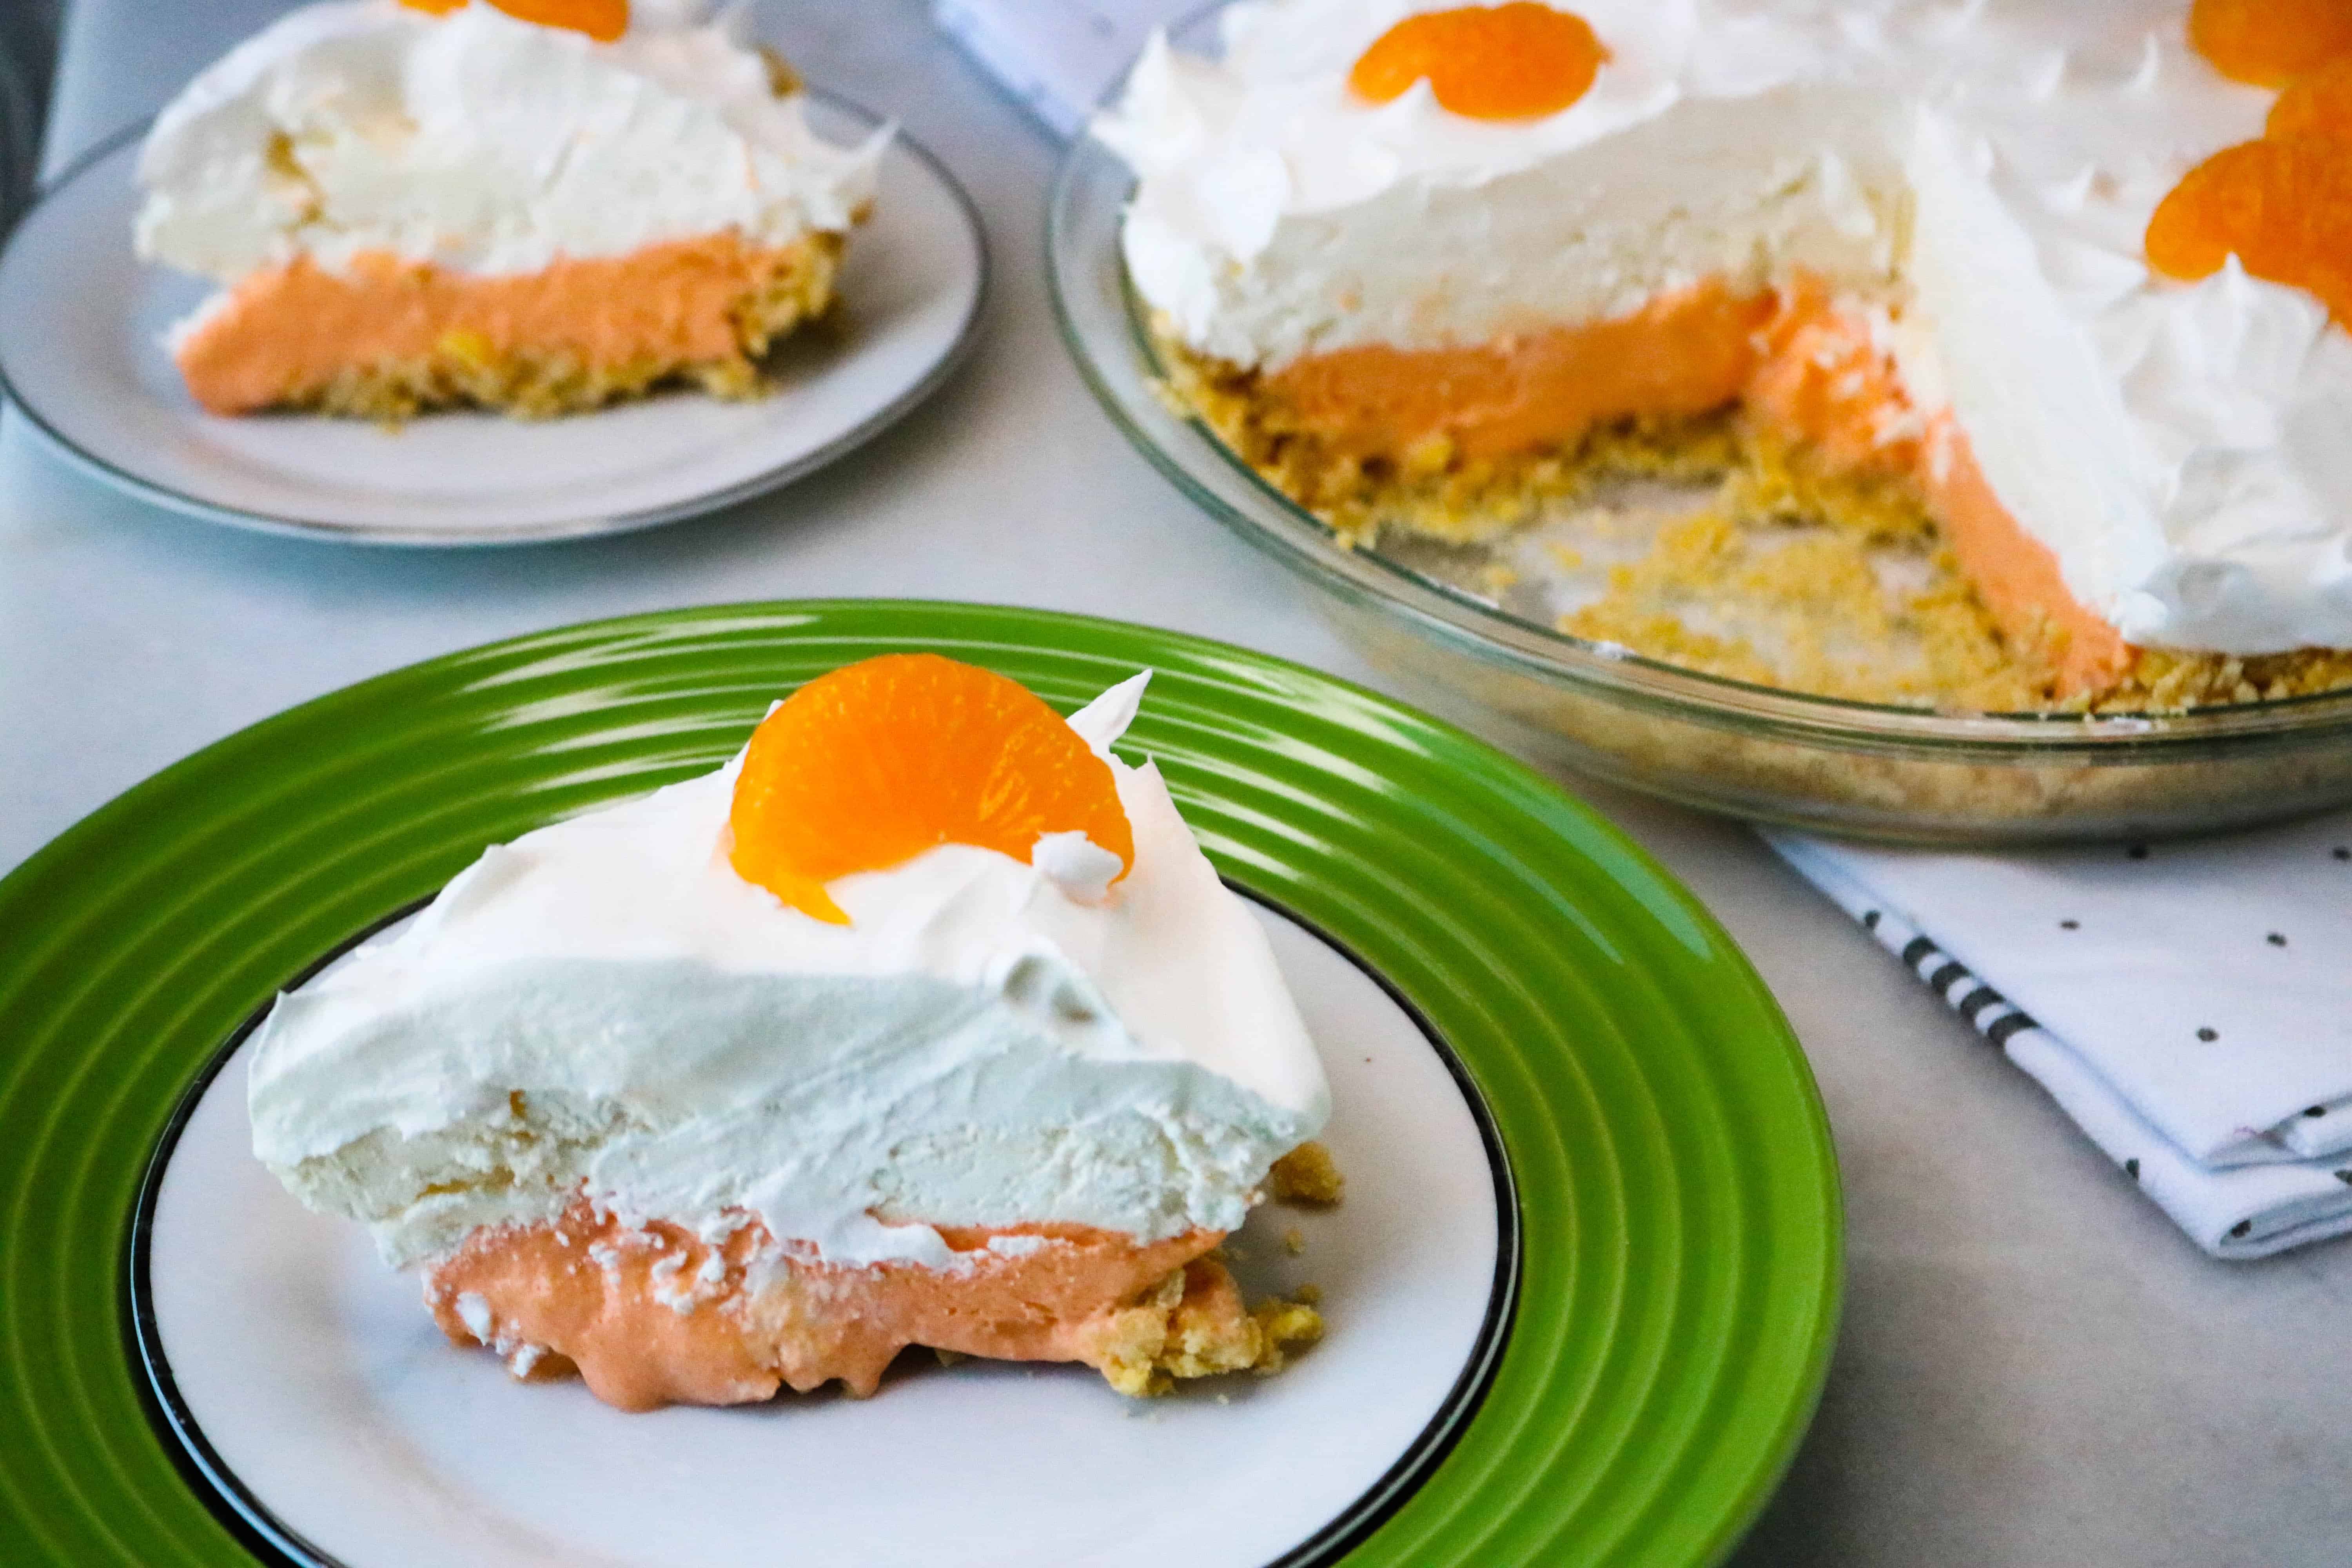 Boozy Orange Creamsicle Pie sliced and served on a plate.